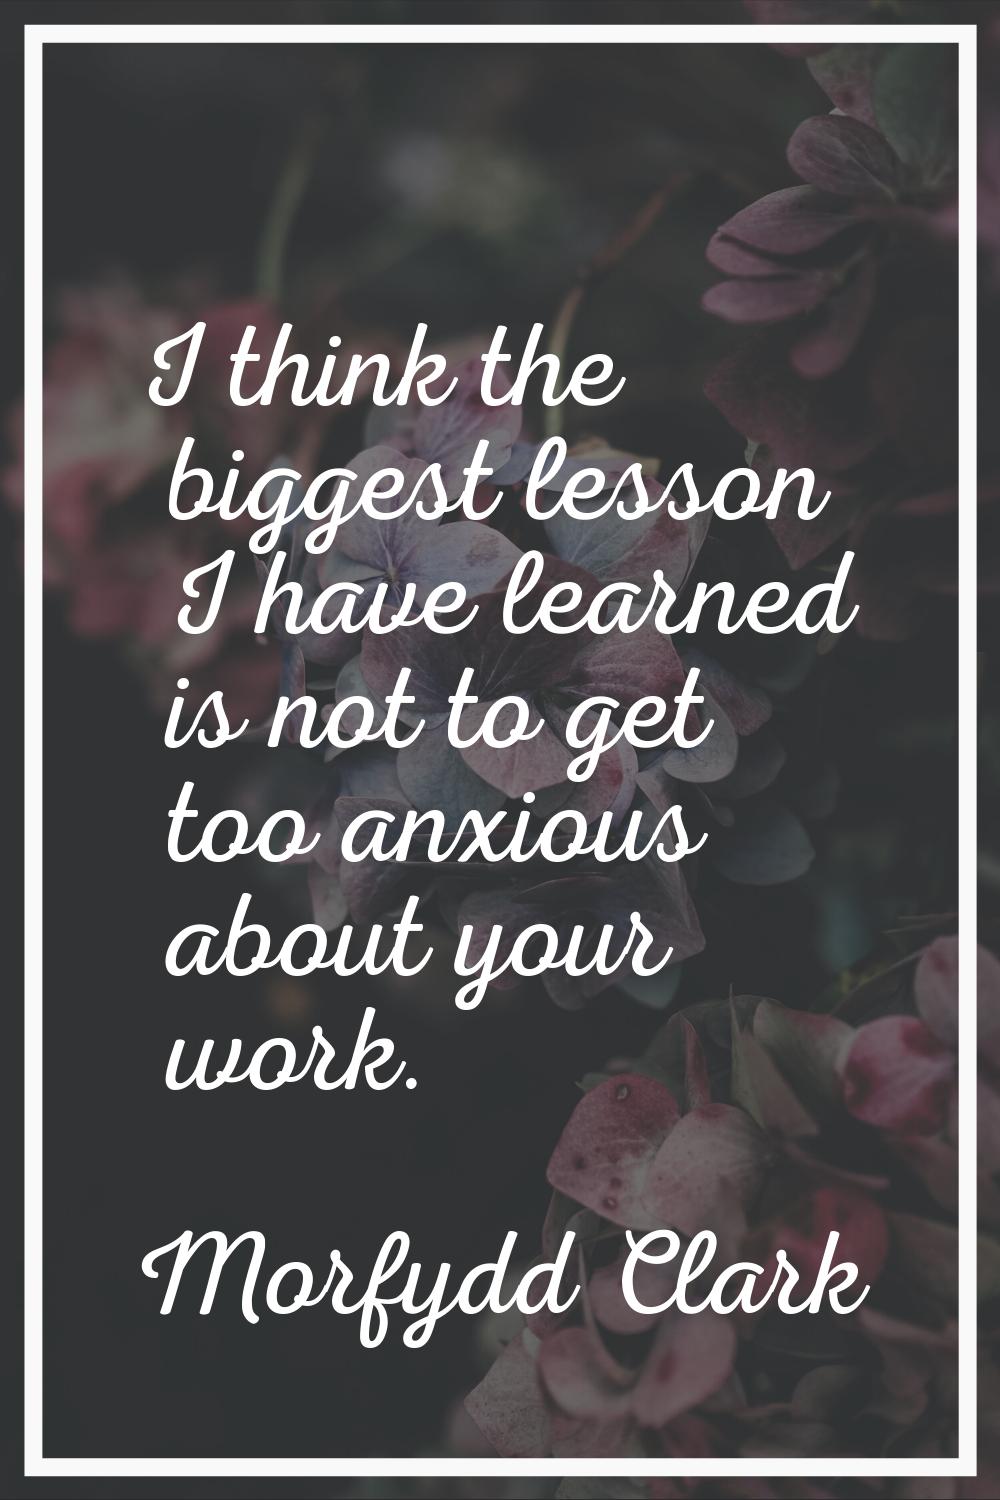 I think the biggest lesson I have learned is not to get too anxious about your work.